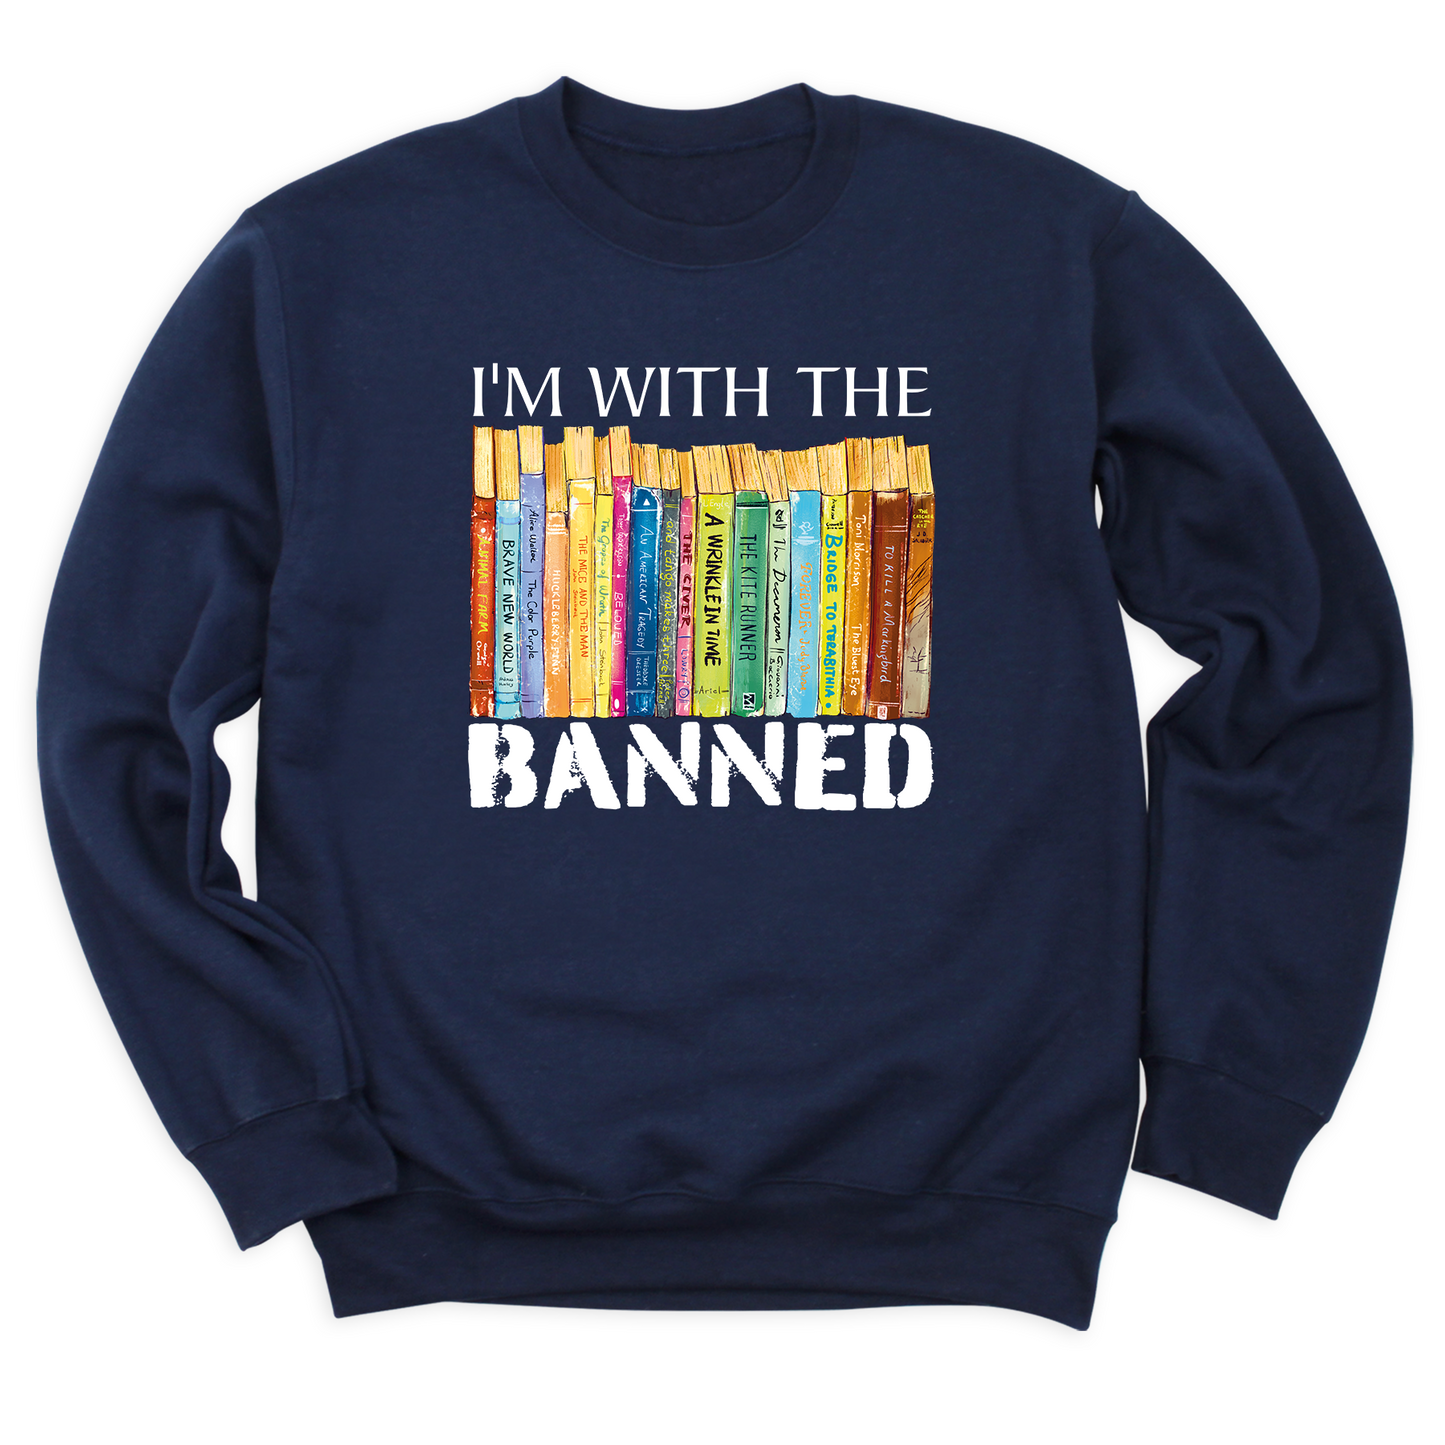 i'm with banned shirts navy blue